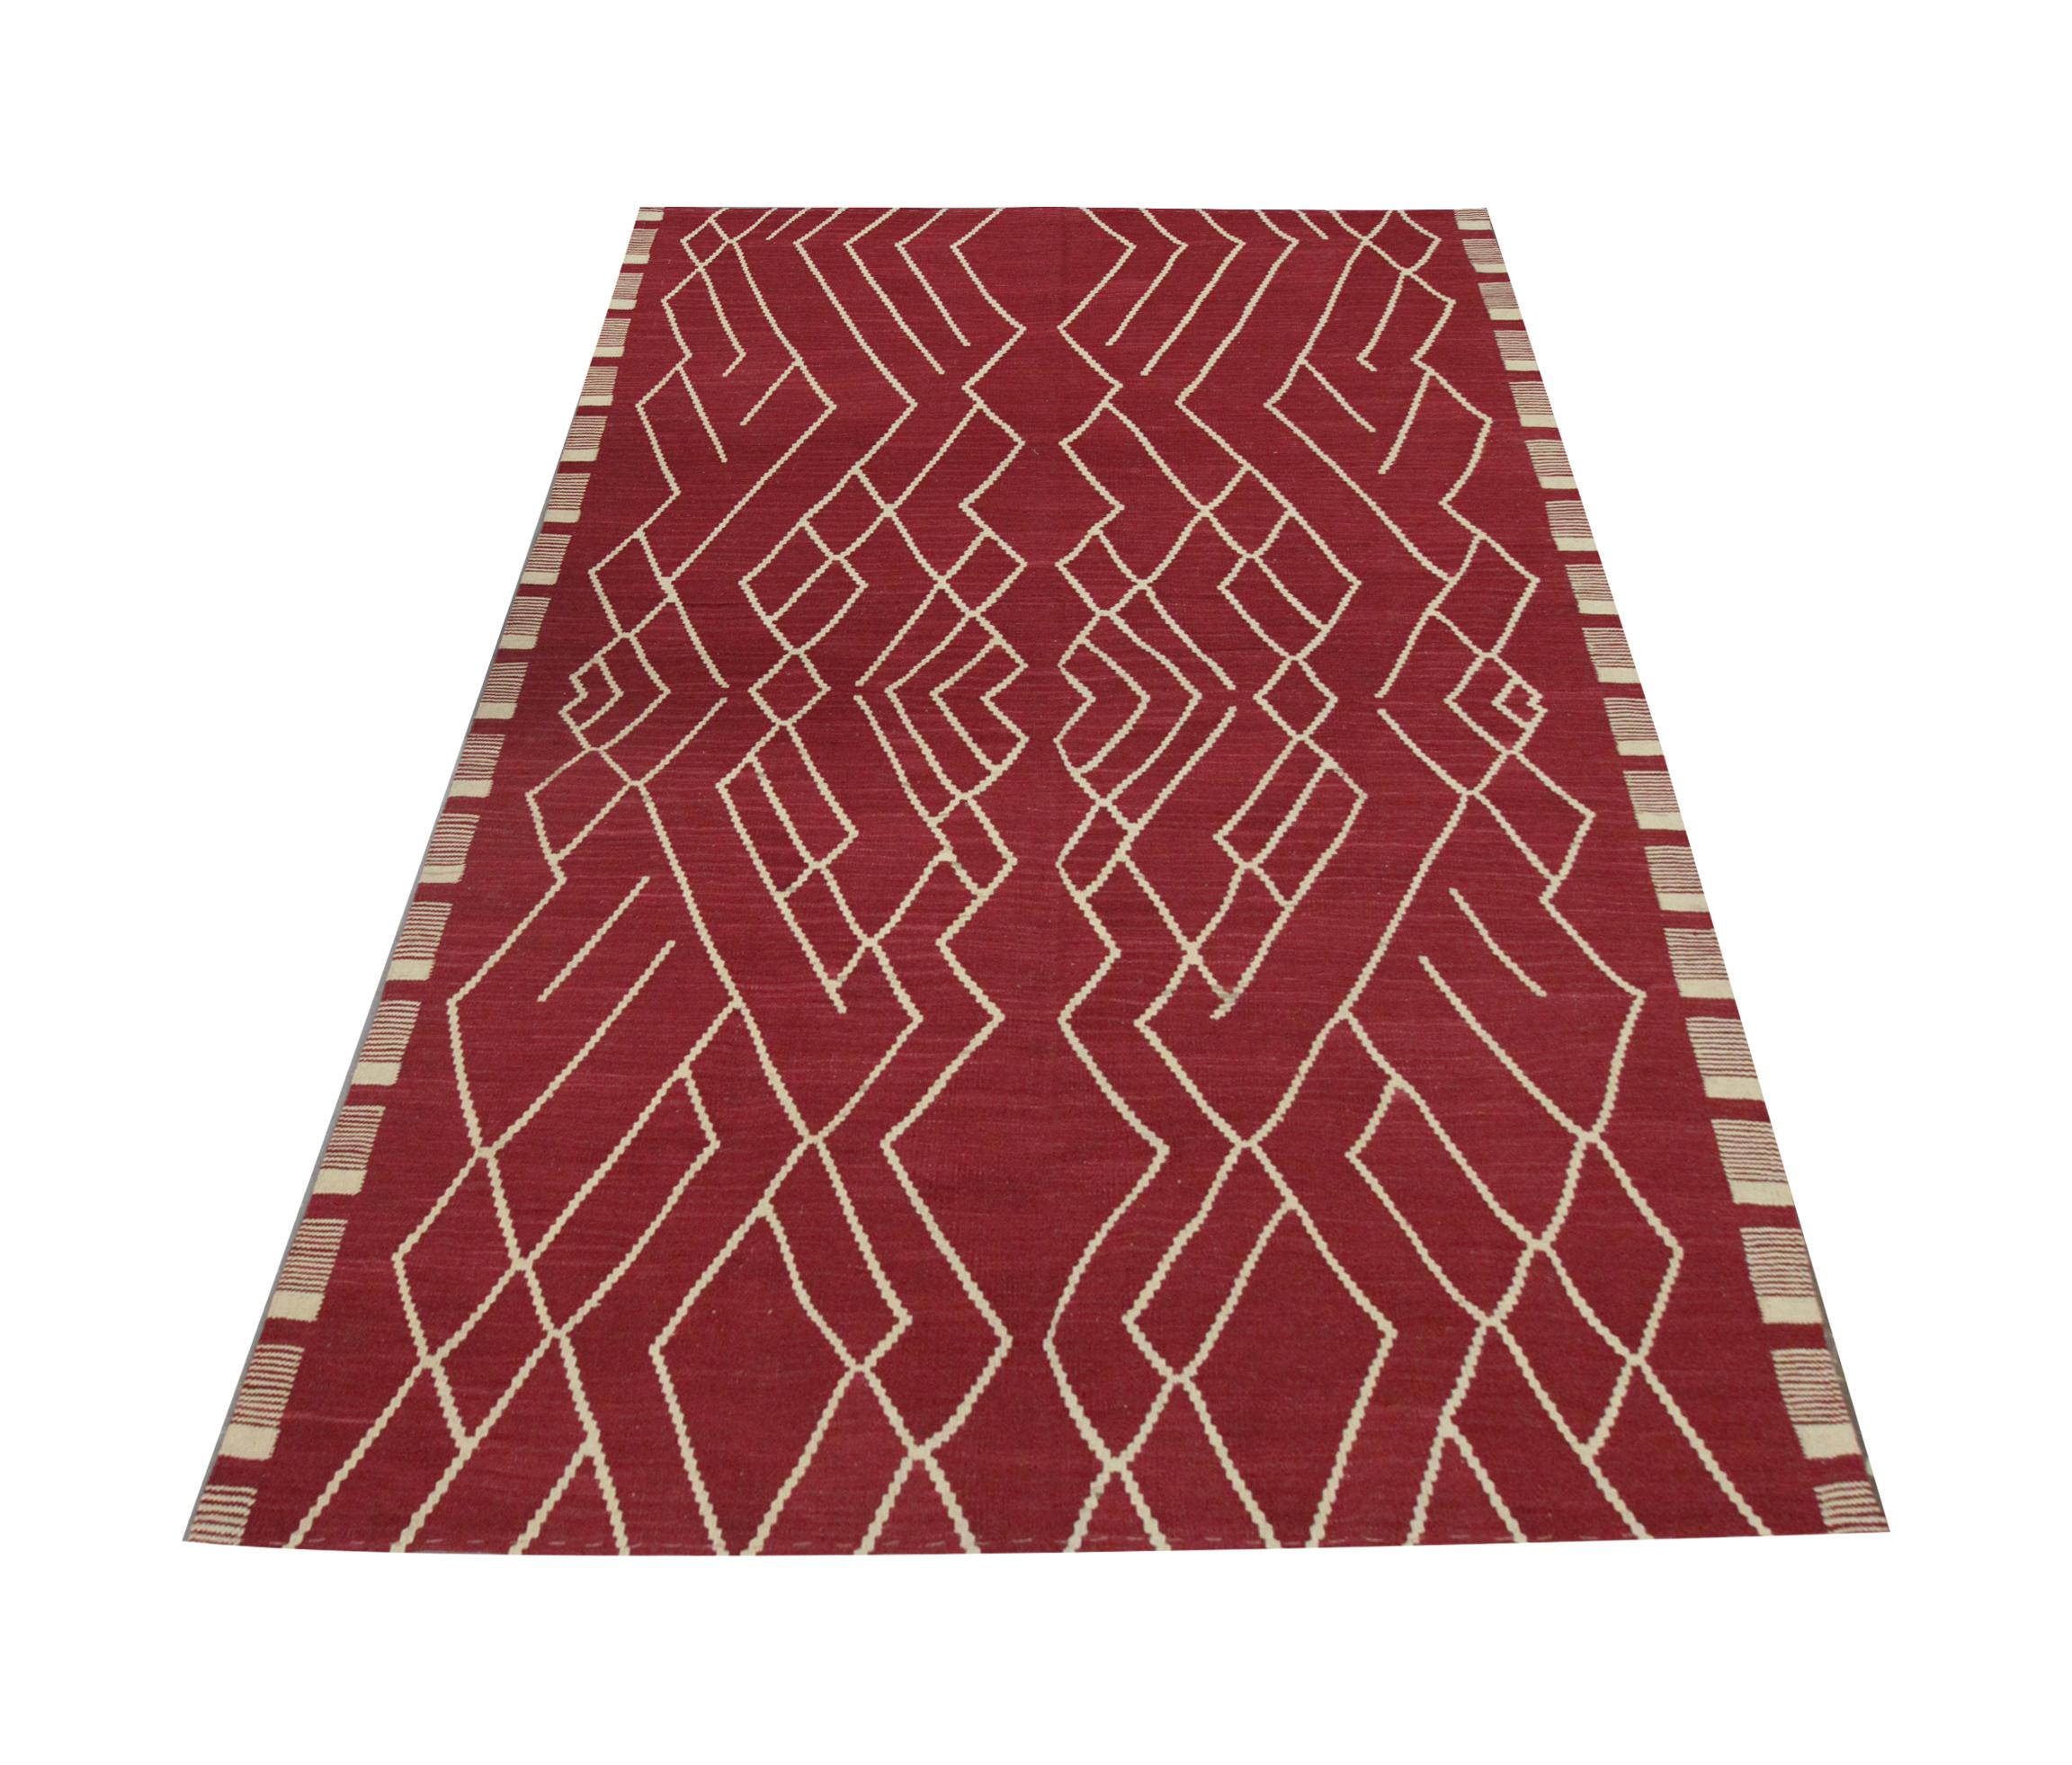 This modern wool ara rug is a flatwoven Kilim, constructed in Afghanistan. The patterns featured are symmetrically woven and from certain angles appear to emulate a mountainous landscape. The linear patterns are woven in cream and contrast with the